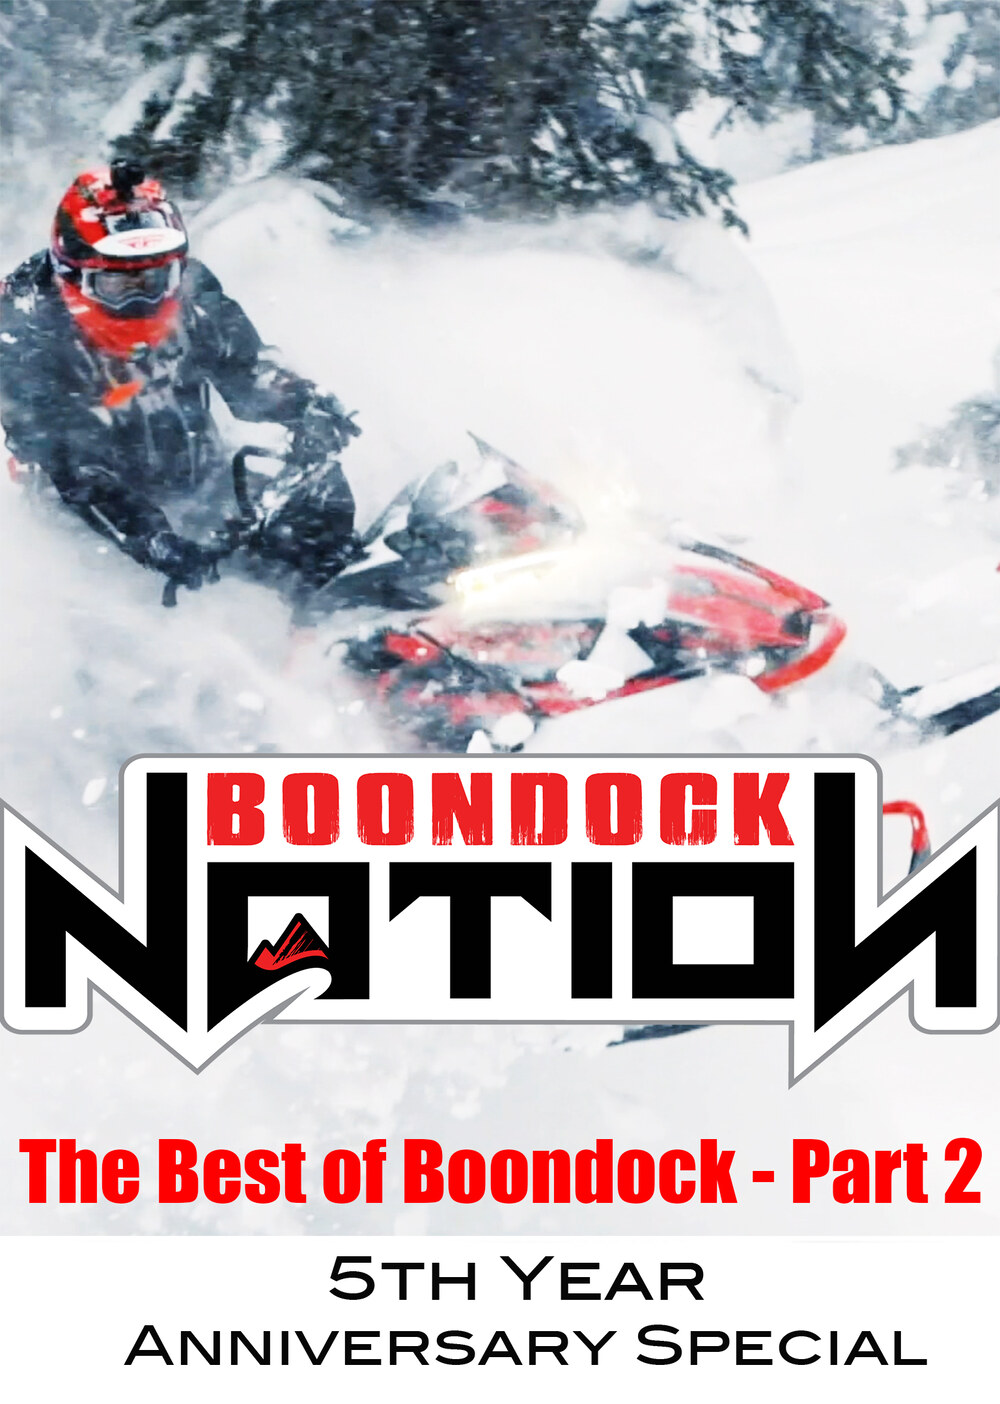 K5039 - The Best of Boondock - Part 2 - 5th Year Anniversary Special